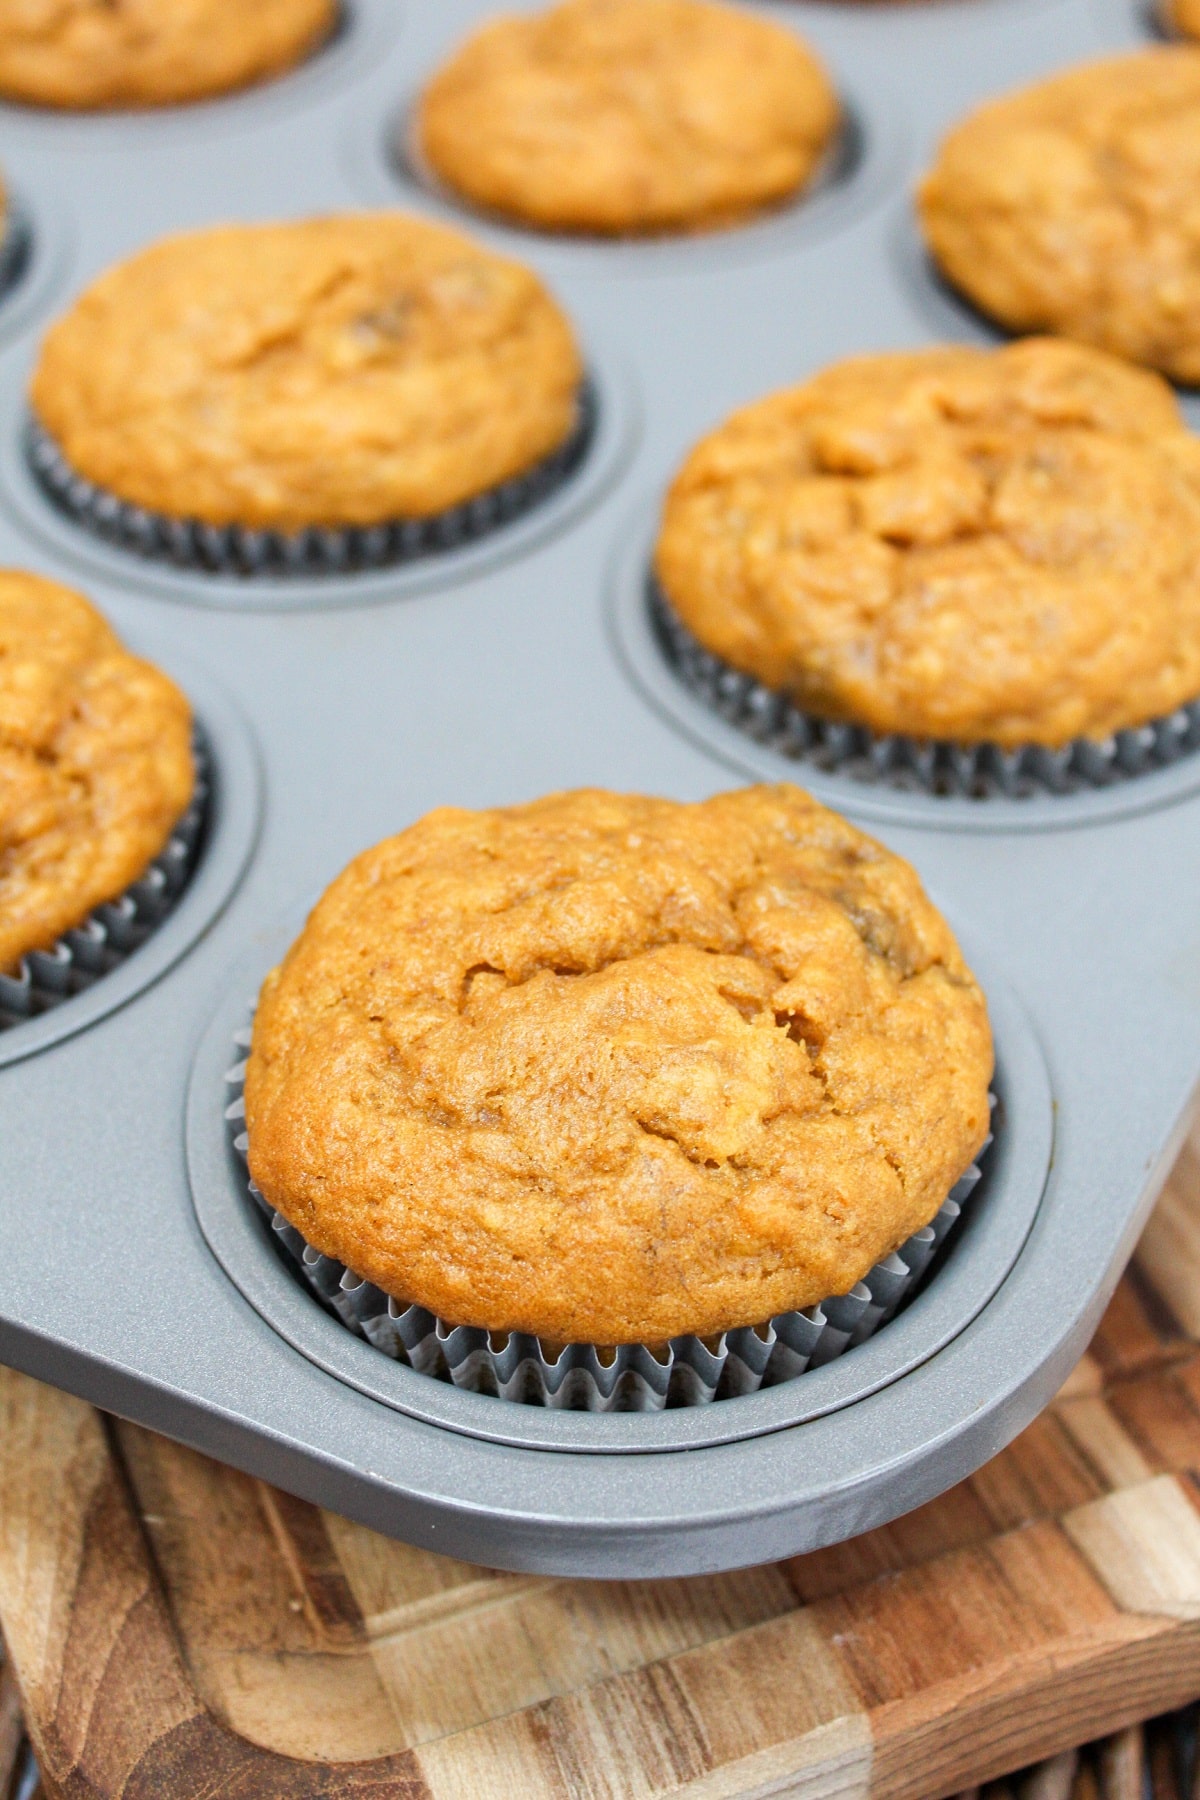 Baked muffins in a metal tin.